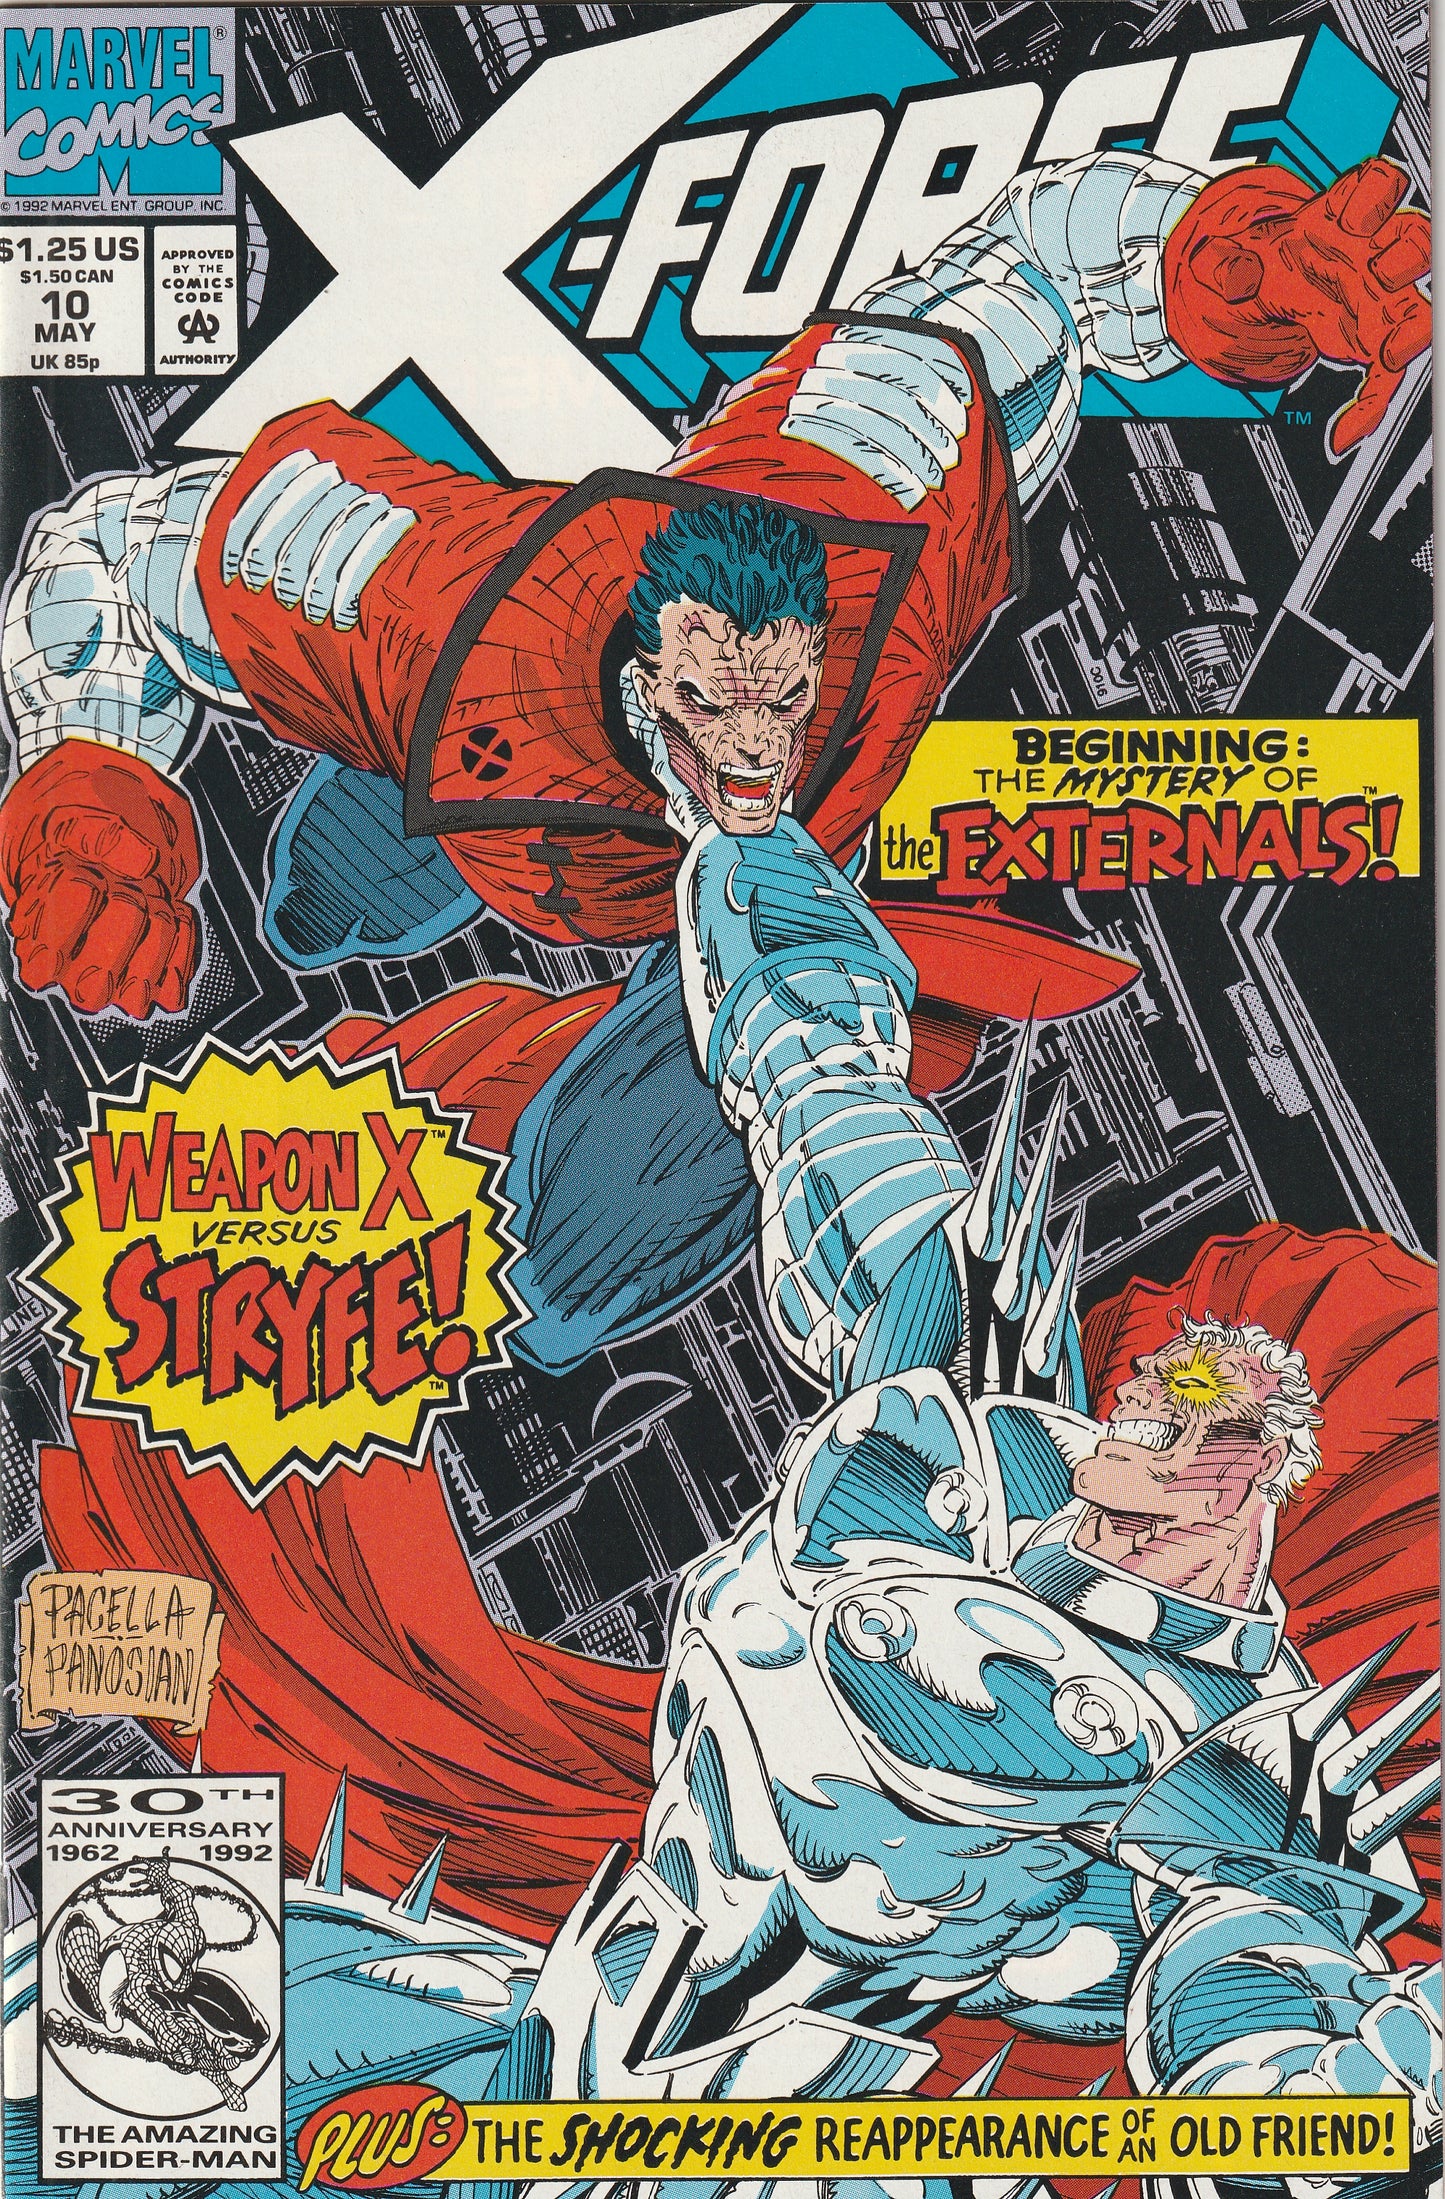 X-Force #10 (1992) - 1st Appearance of The Externals